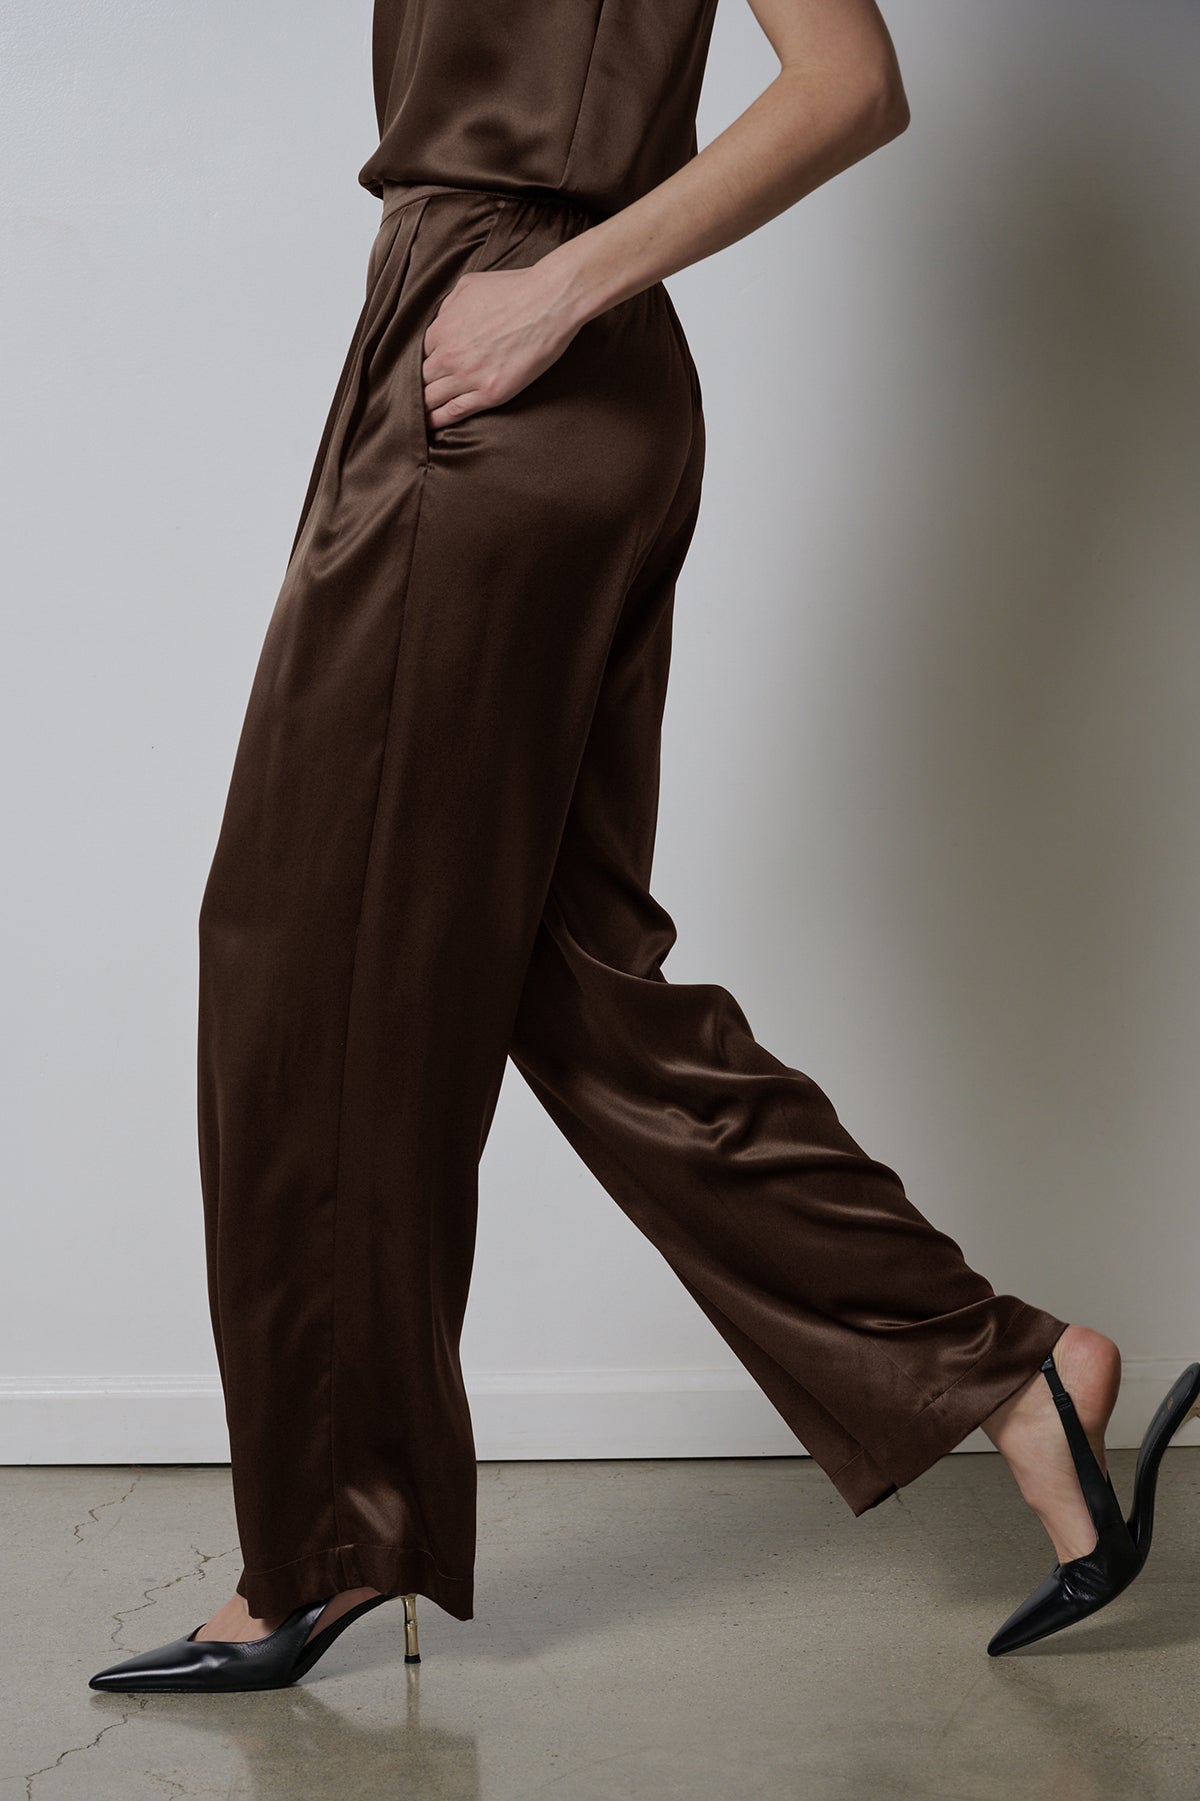 The model is wearing a brown silk Manhattan pant by Velvet by Jenny Graham.-36594676596929